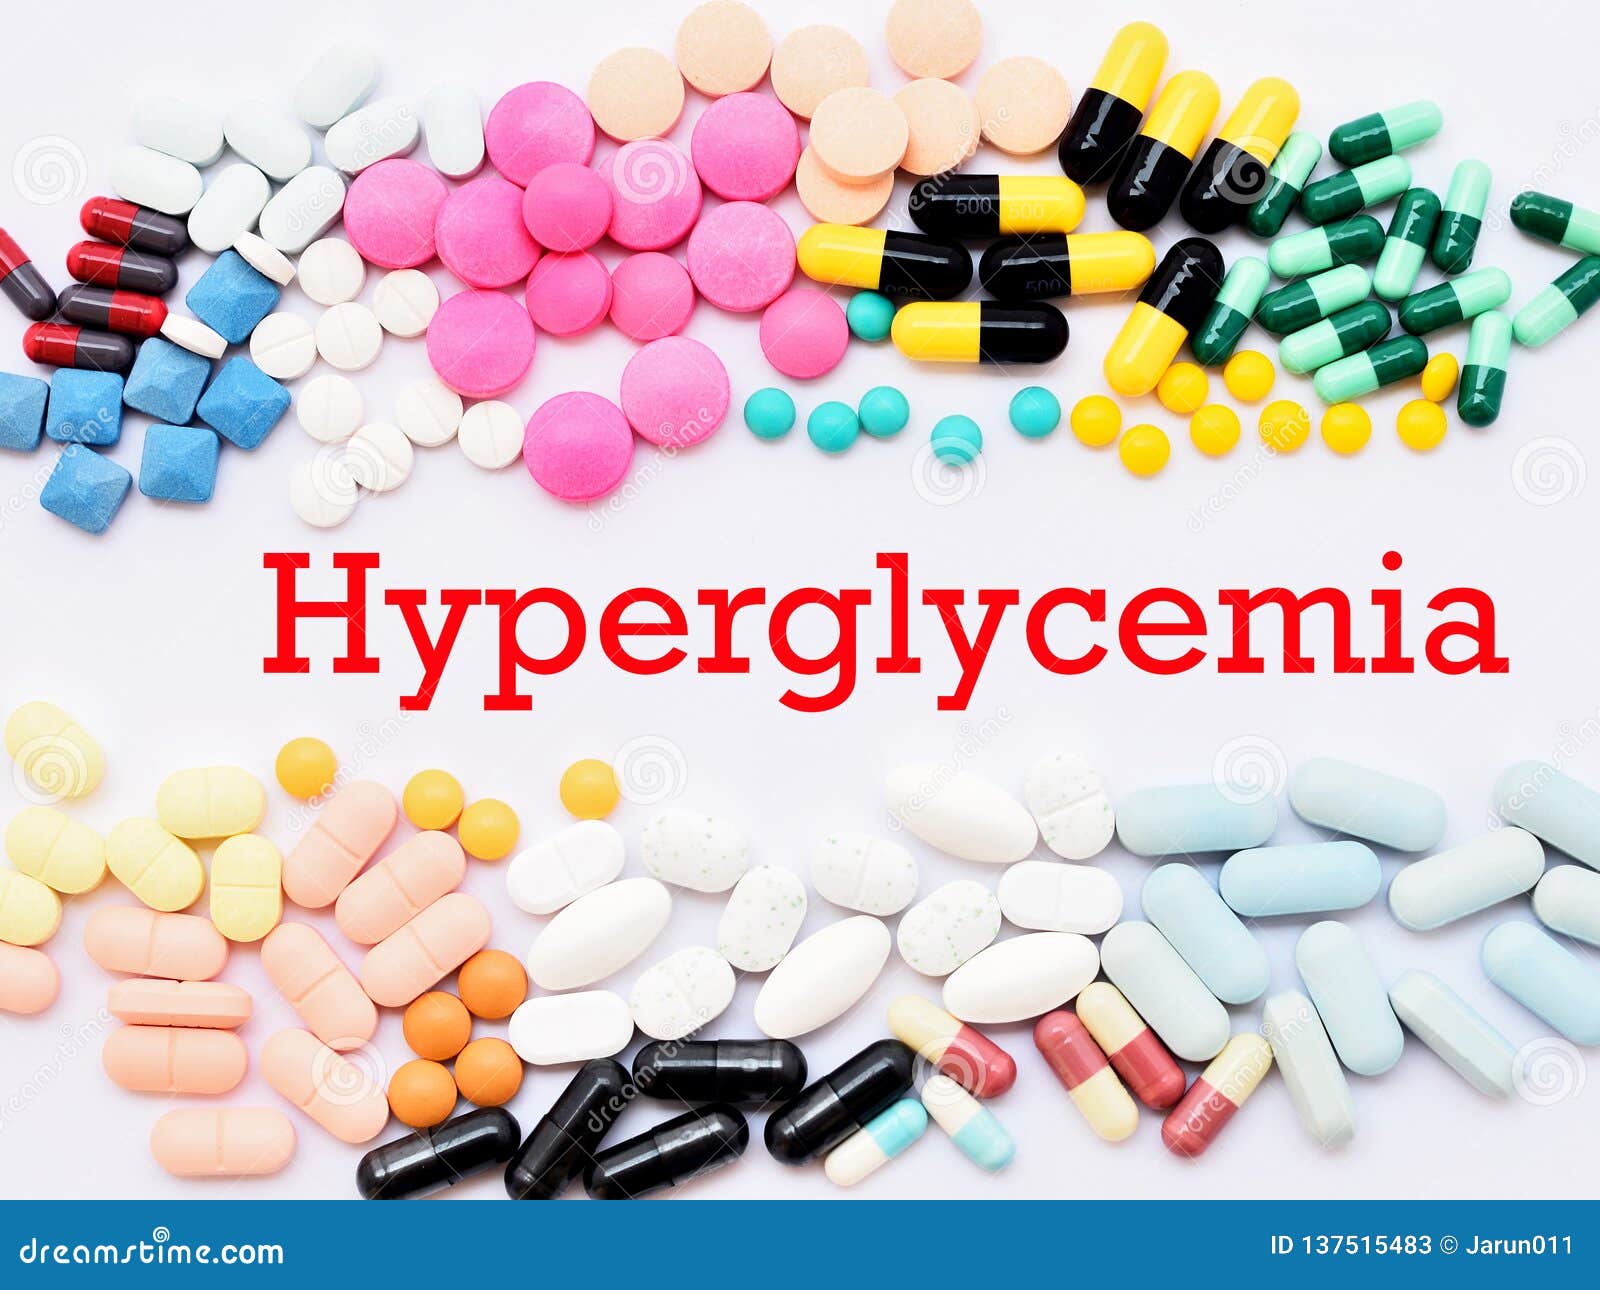 drugs for hyperglycemia treatment